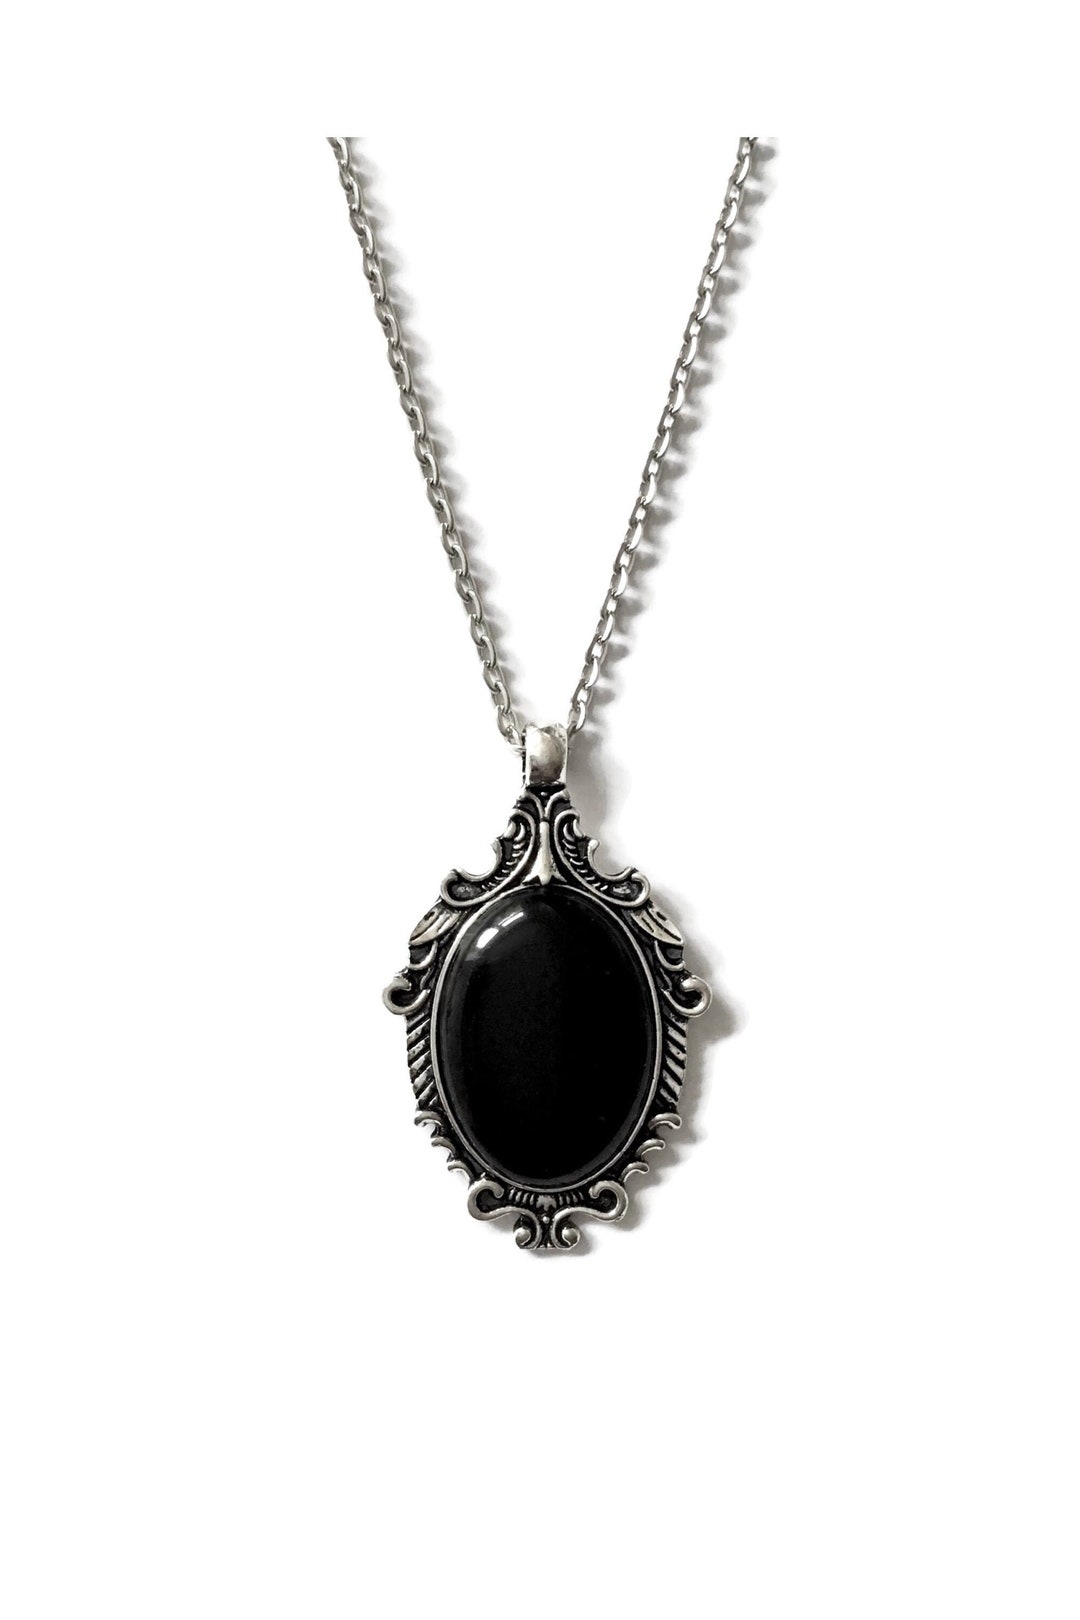 Gothic Victorian Silver and Black Cabochon Necklace, Victorian Vintage ...